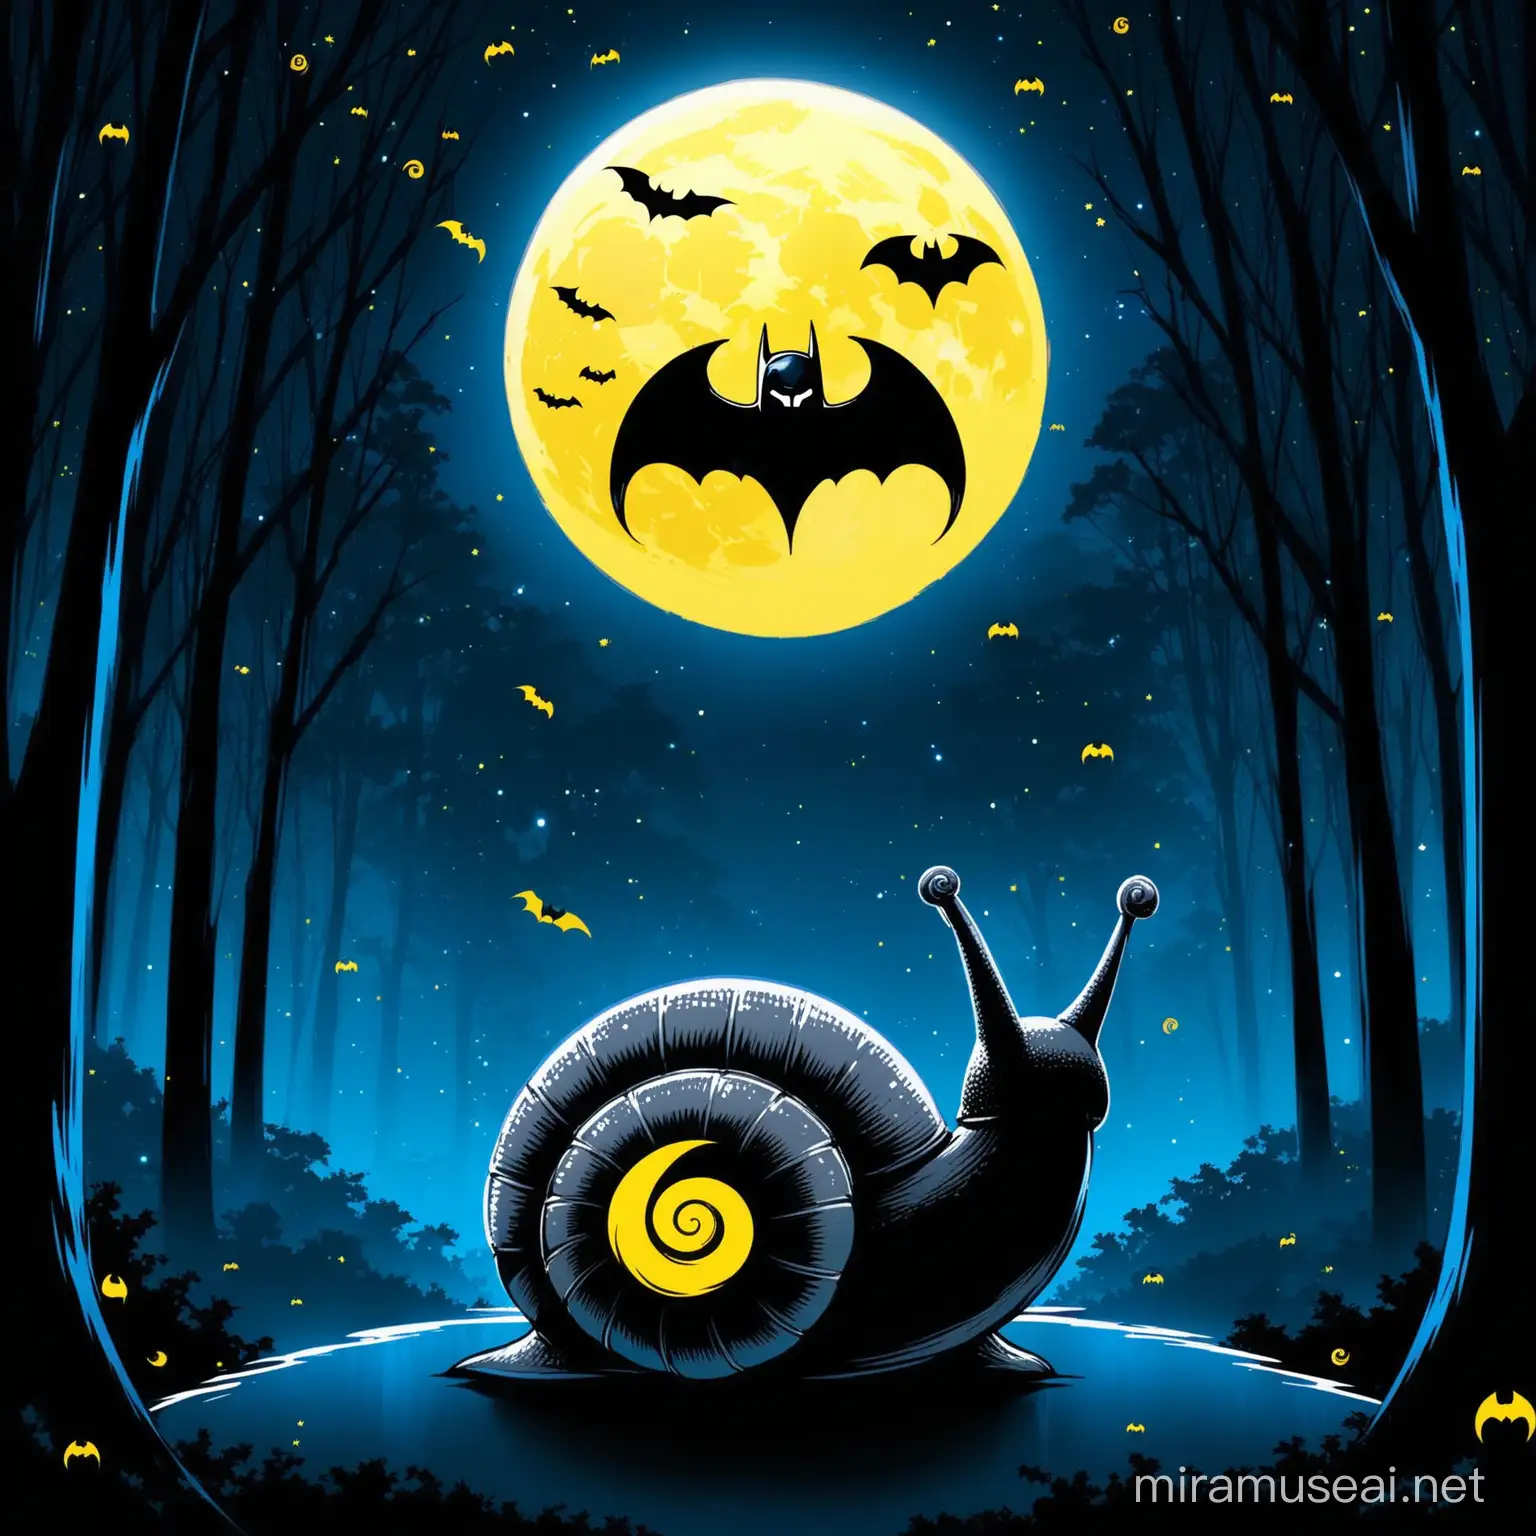 Snail with batman symbol 
appreance - shell with batman symbol on shell only/ (noir grey/blue/yellow) full body
bacground - trees/night/blue full moon